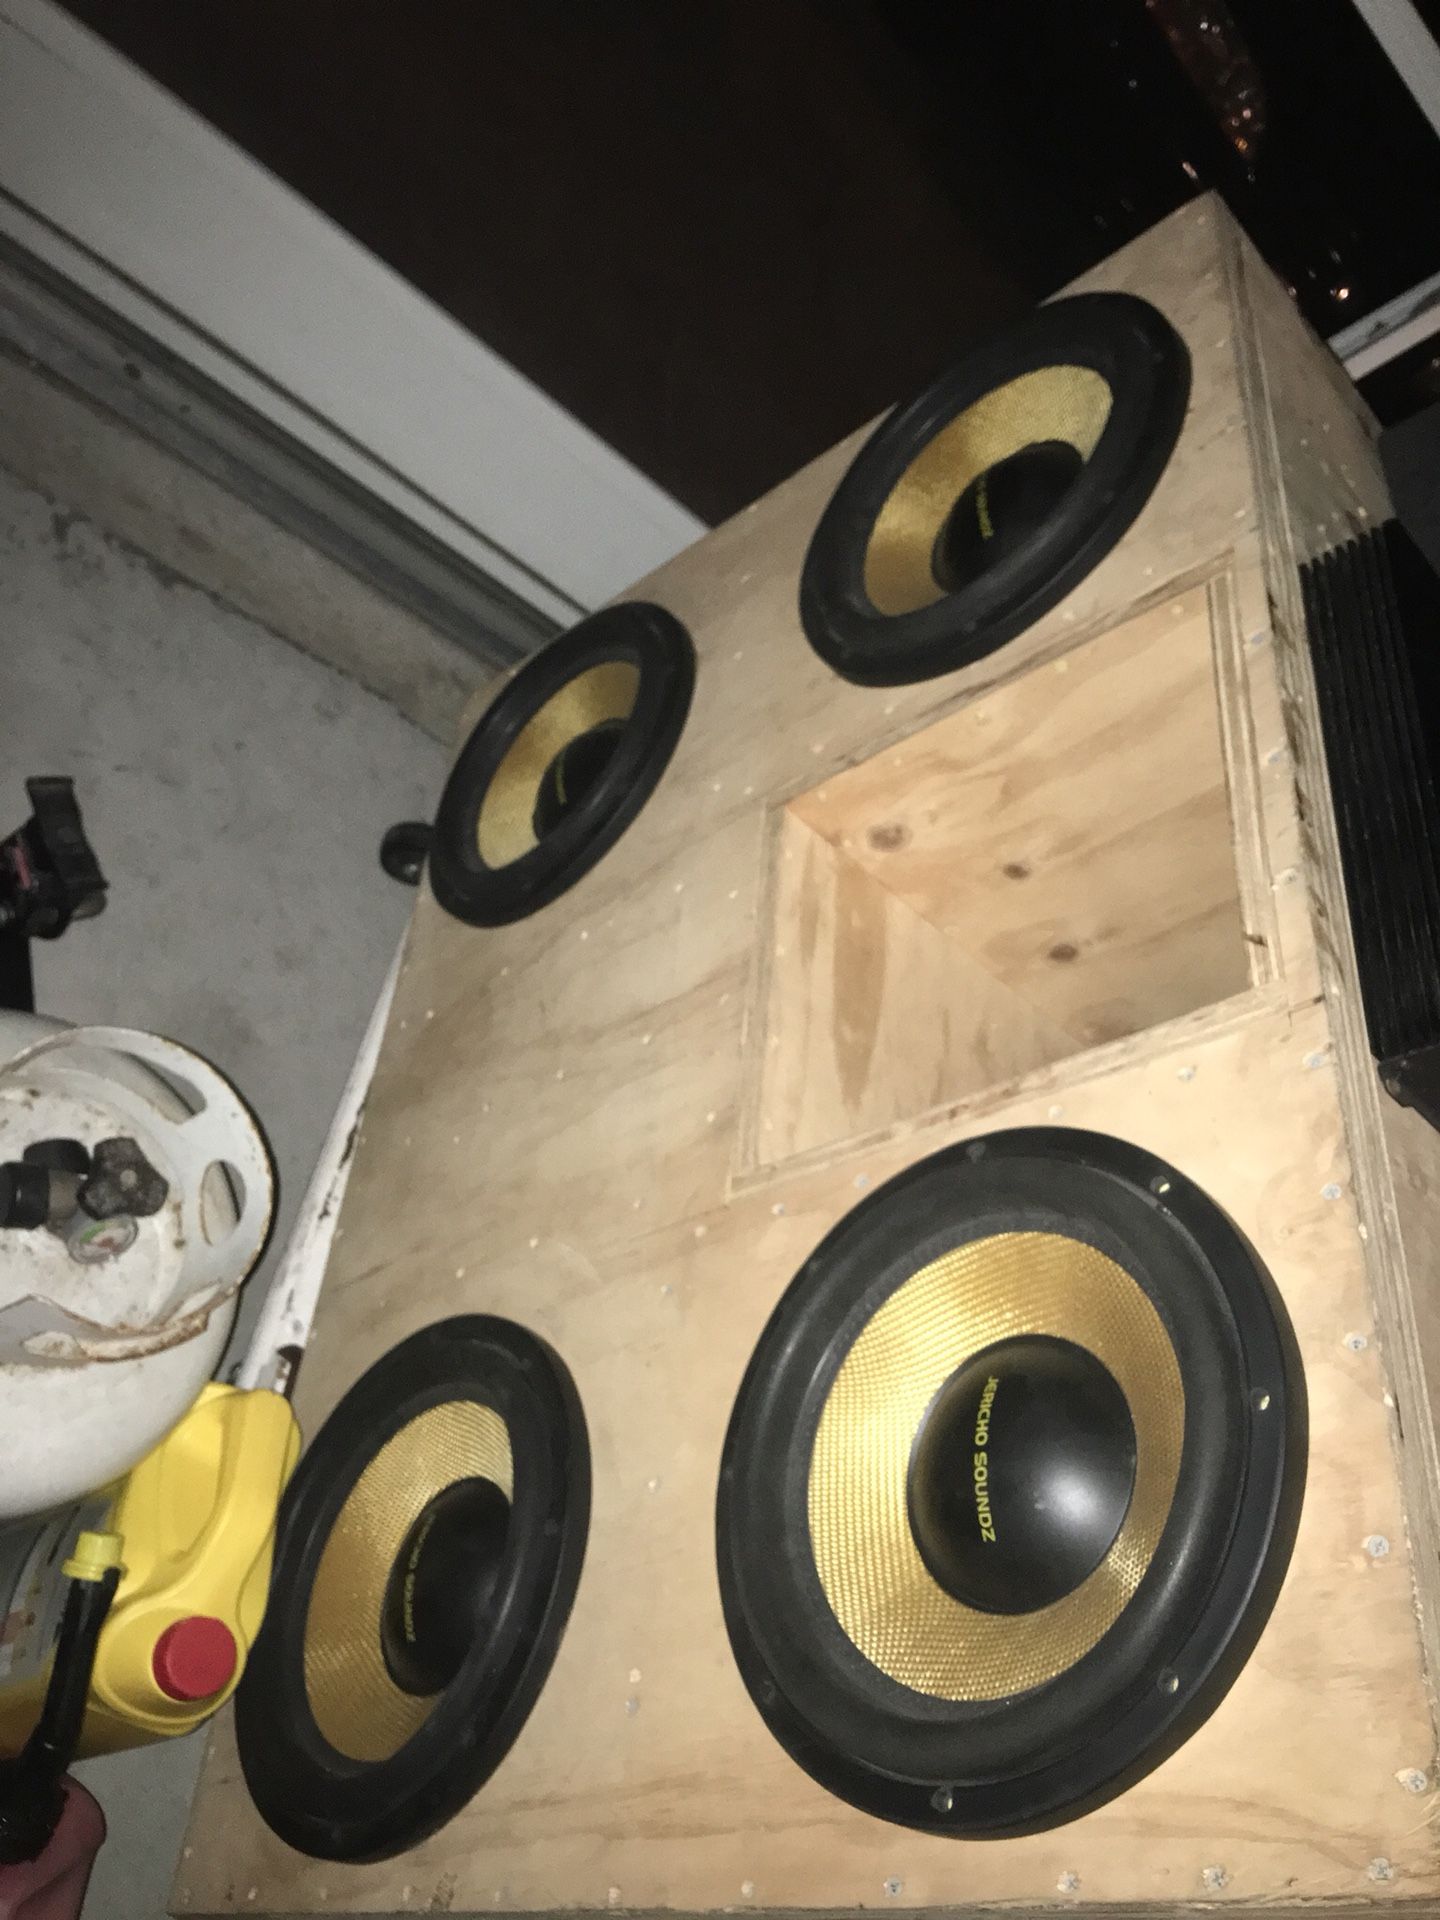 Custom built subwoofer box for 4 12s sub are not included trades are welcome lmk what you have!